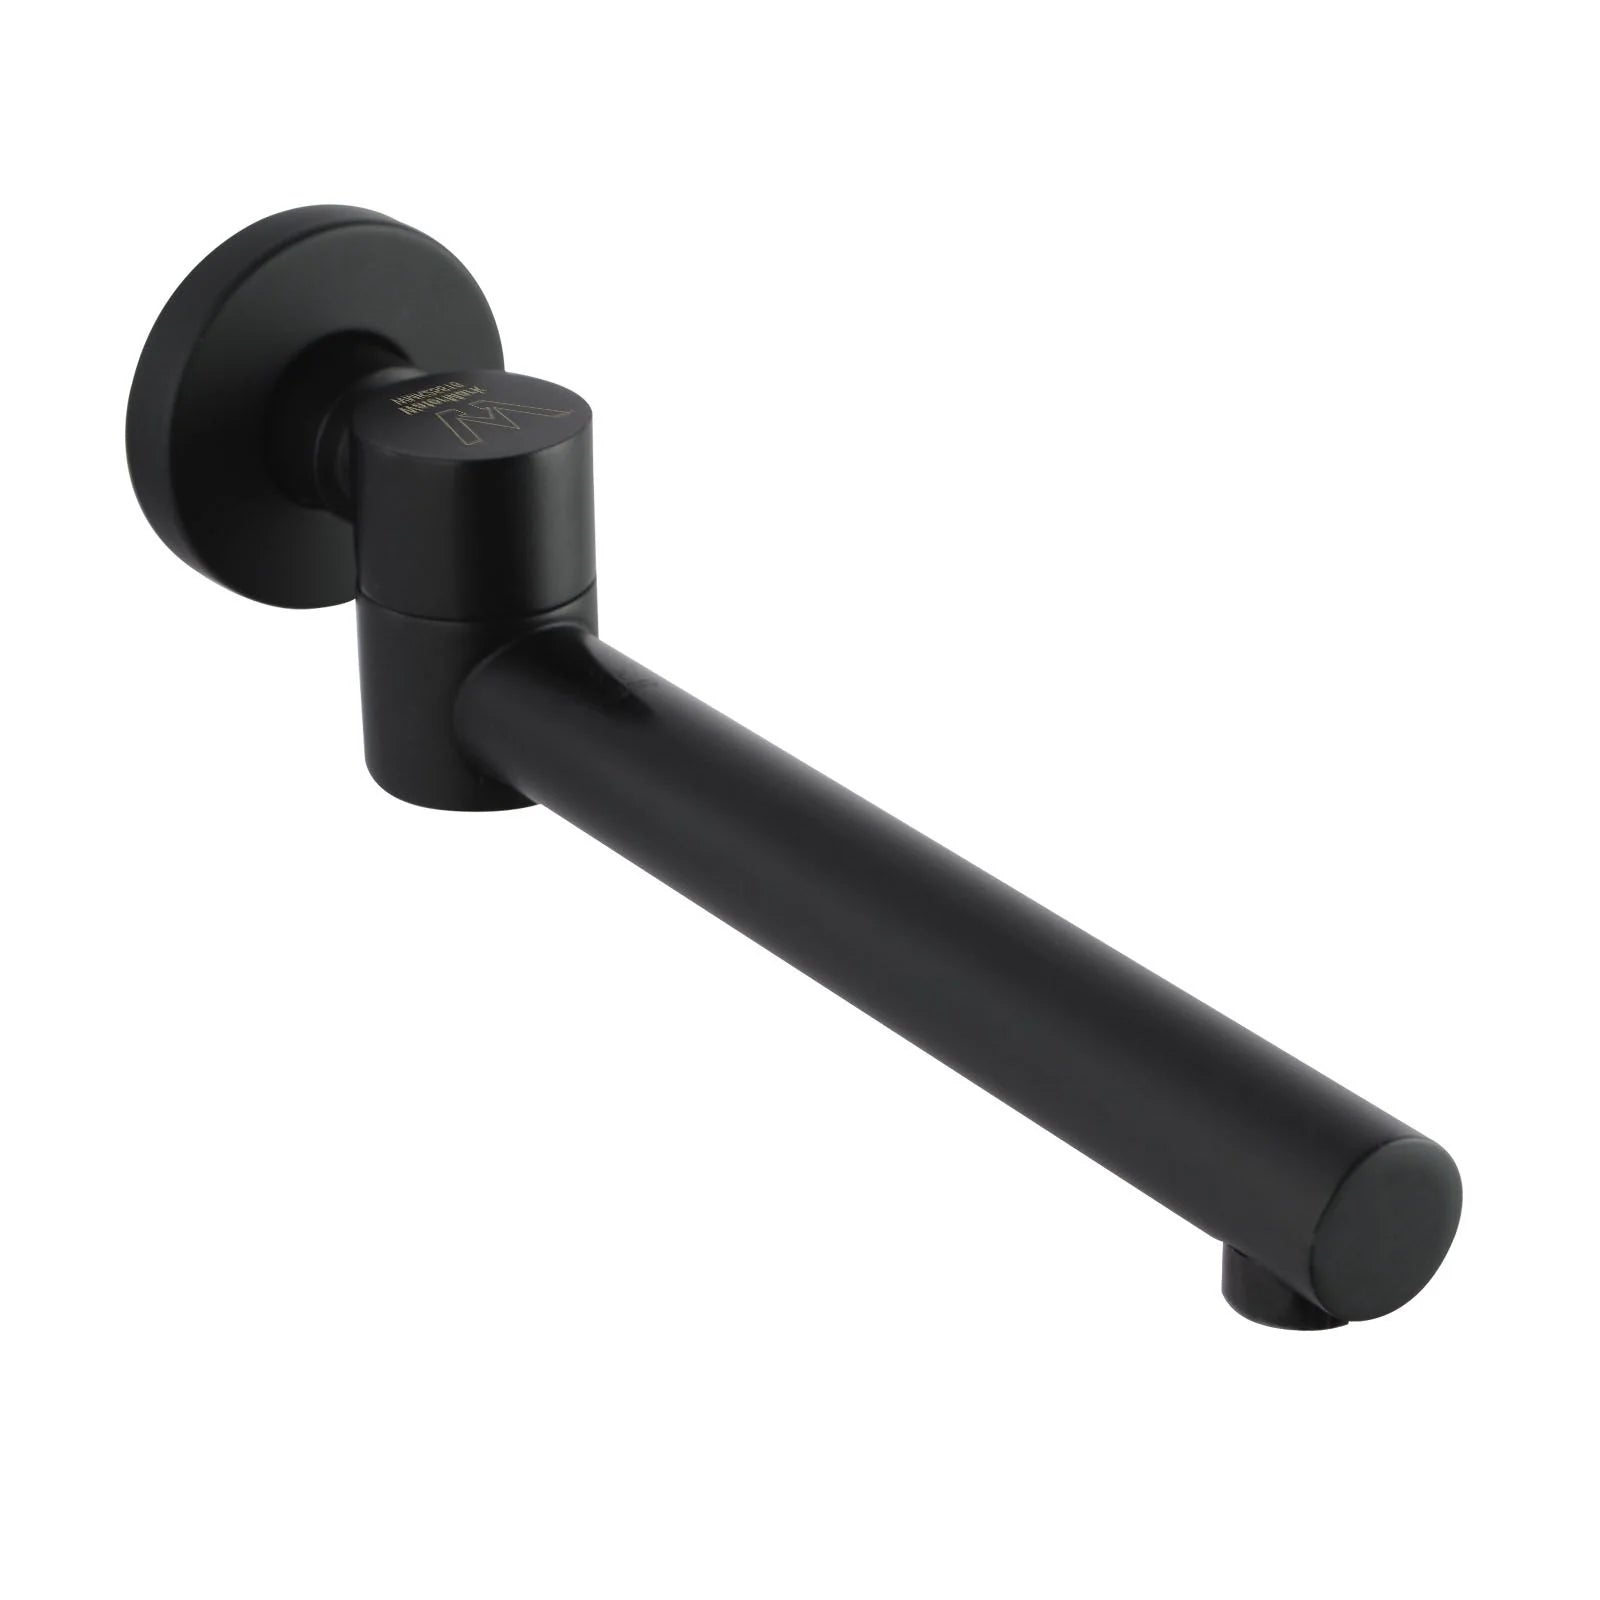 Lucid Pin Round Swivel Wall Spout: Modern fixture for bathtubs/basins, offering flexibility and style-OX0004.BS